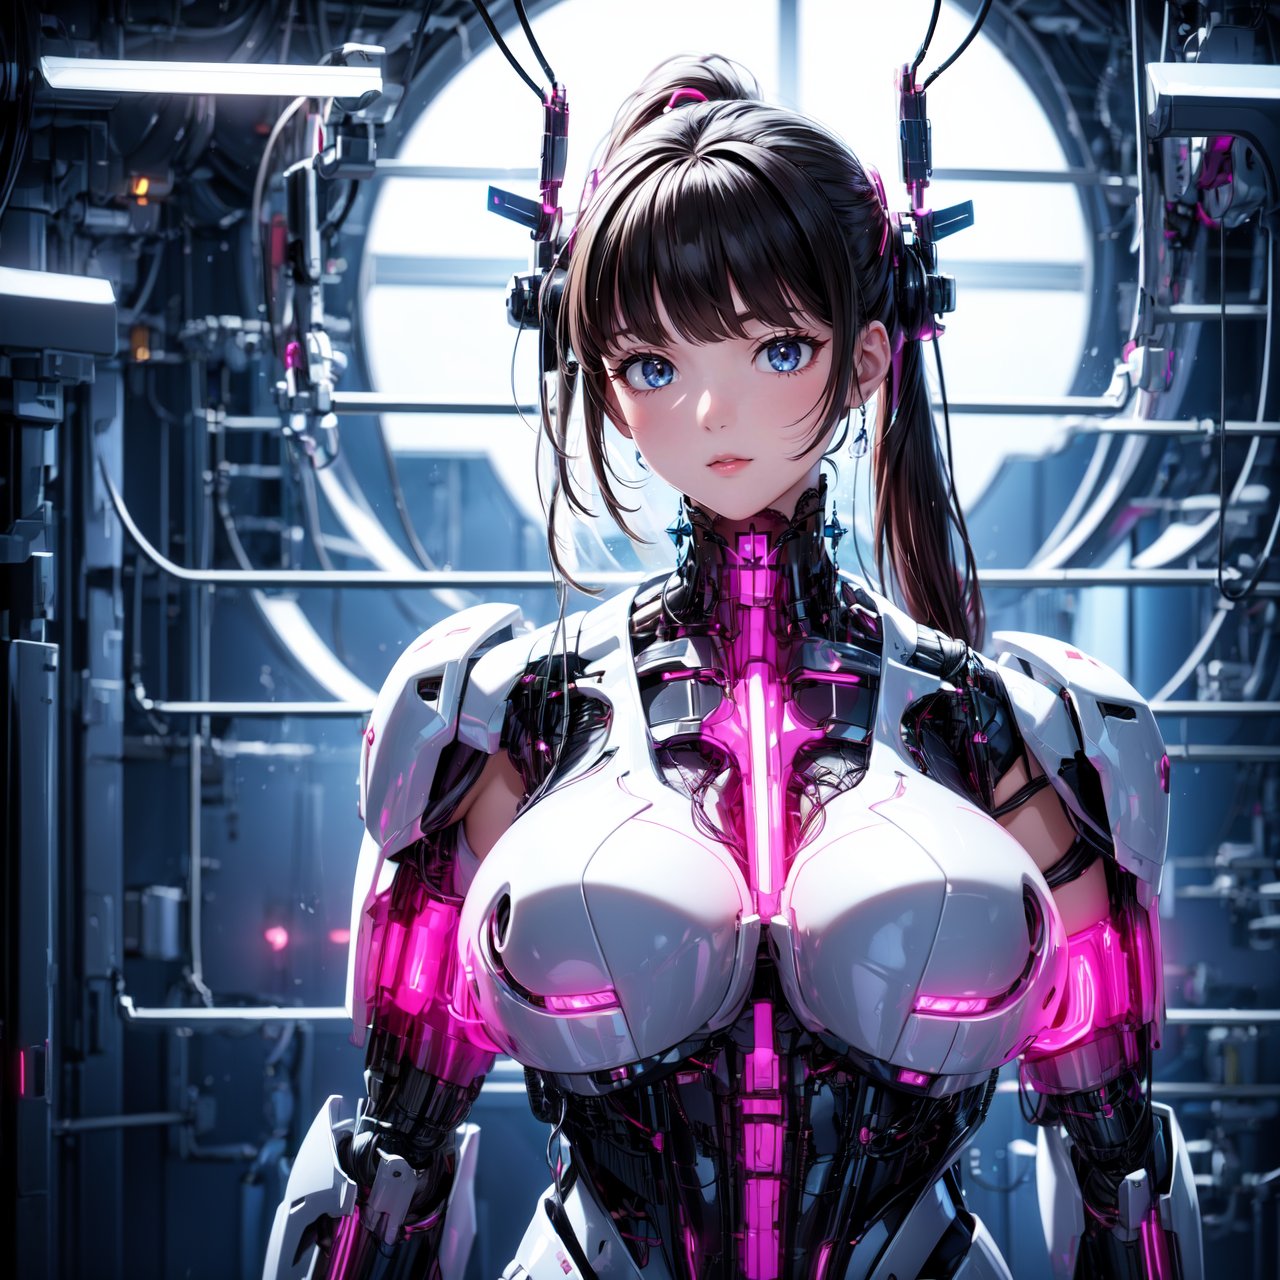 Accurate anatomy, accurate body structure, accurate breast structure, Bright color matching, high contrast,
full body, (upper body:1.2), 
1girl, solo, beautiful face, black_hair, Long ponytail,  (gigantic breast:1.2),  (wires), robotic body, robotics arms, robotic legs, robotic hands, armored, straight leg, mechanical, mecha, light particles, Pink Mecha, All-round fill light, 
kimono, laboratory,
CyberMechaGirl,Cyberpunk,CyberMechaGirl